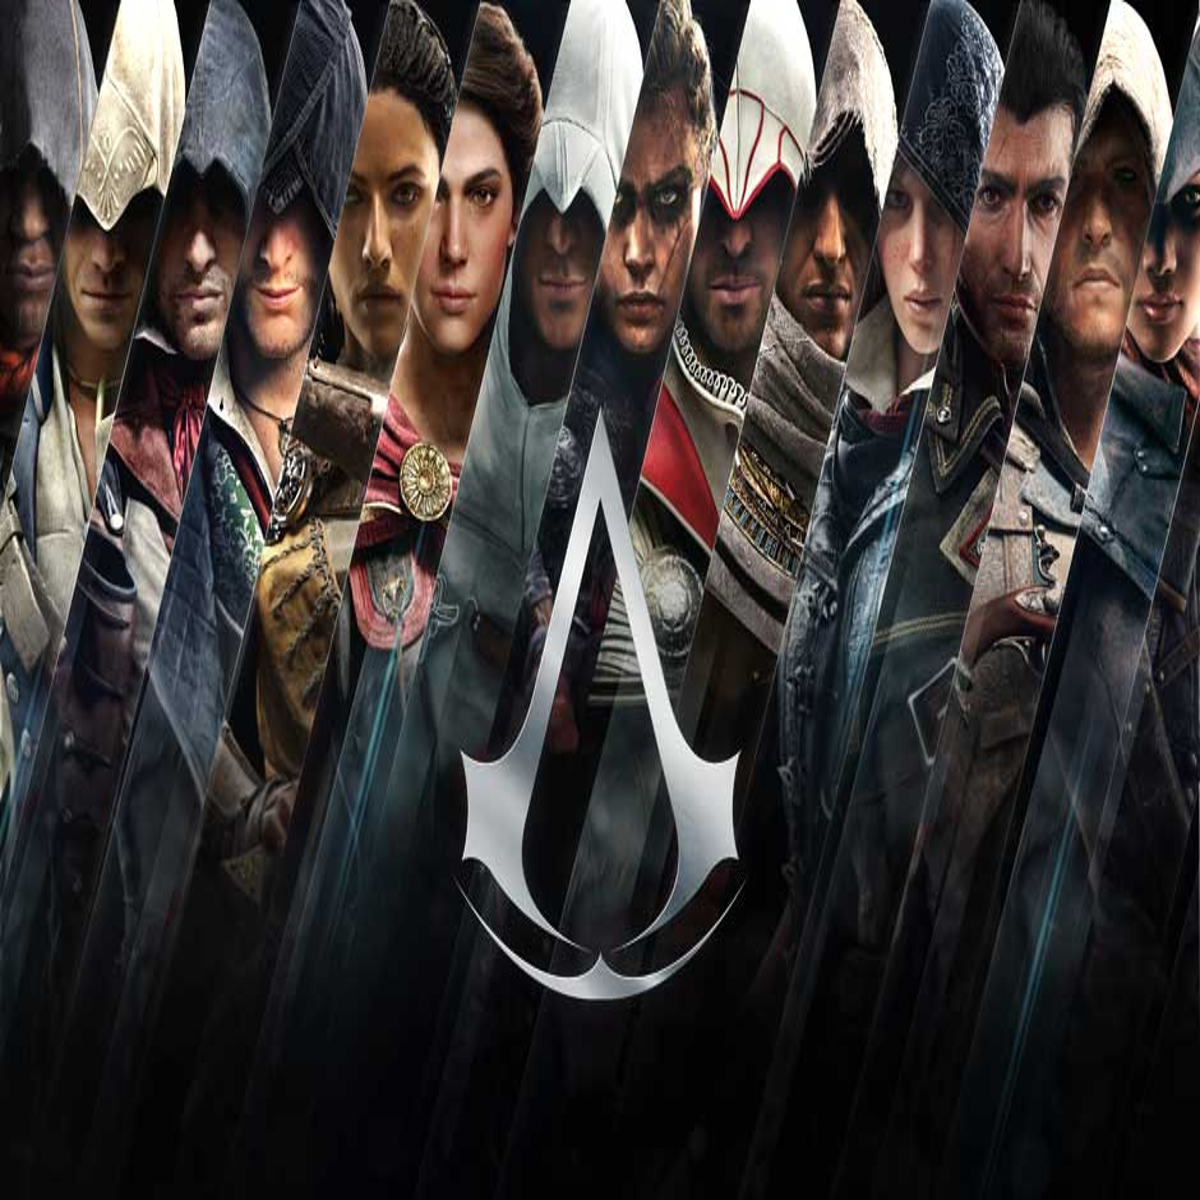 Is Assassin's Creed 1 any good today?